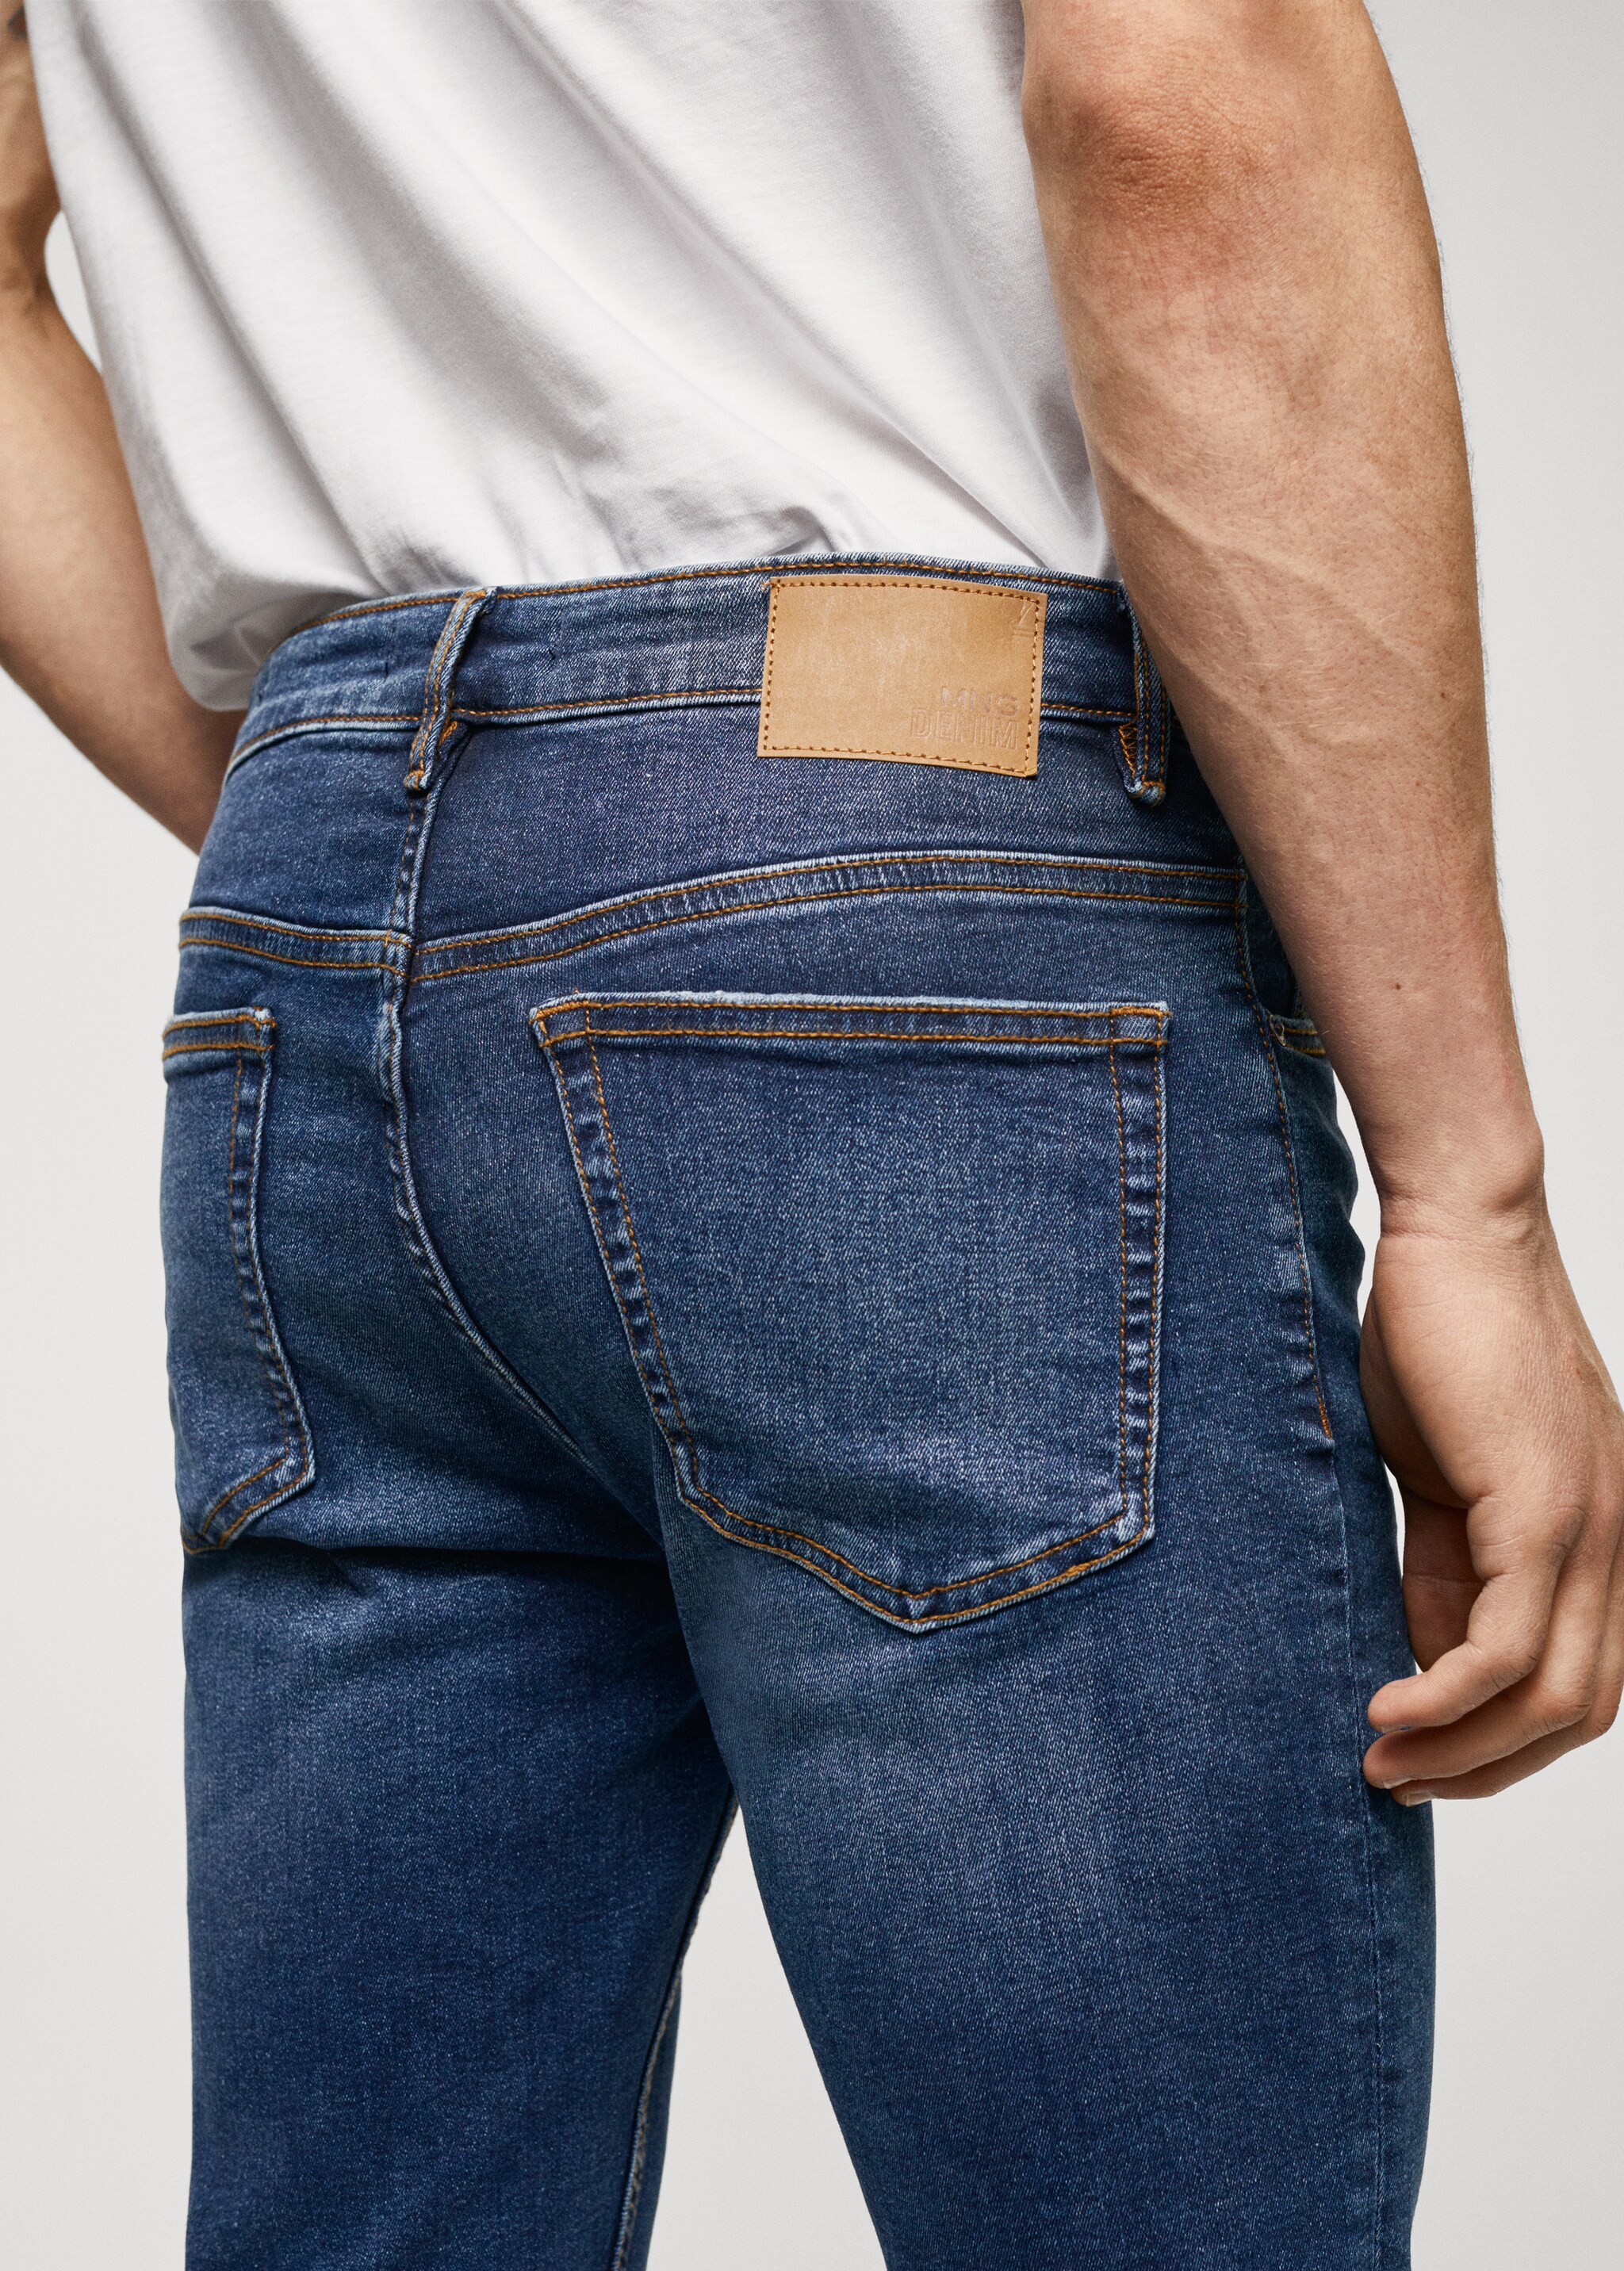 Jeans Jude skinny fit - Details of the article 6